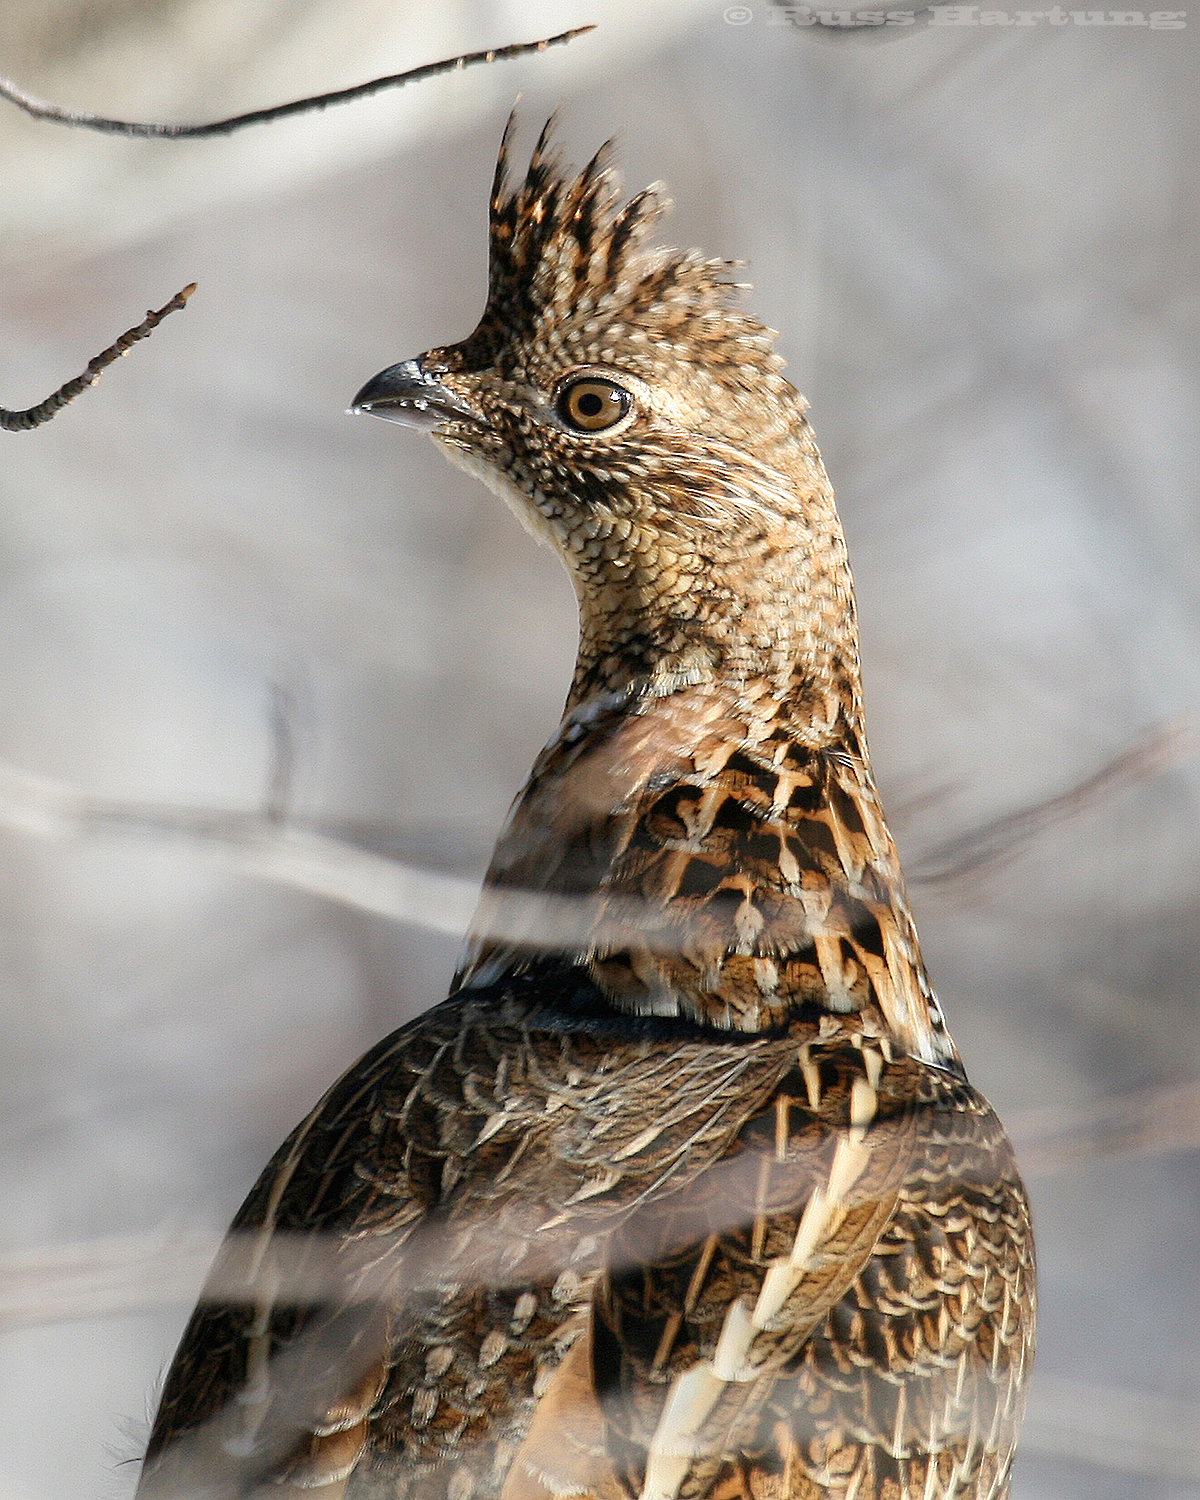 “Ruffed Grouse” - Jury Selection Lake Placid Center for the Arts 2010 Juried Show